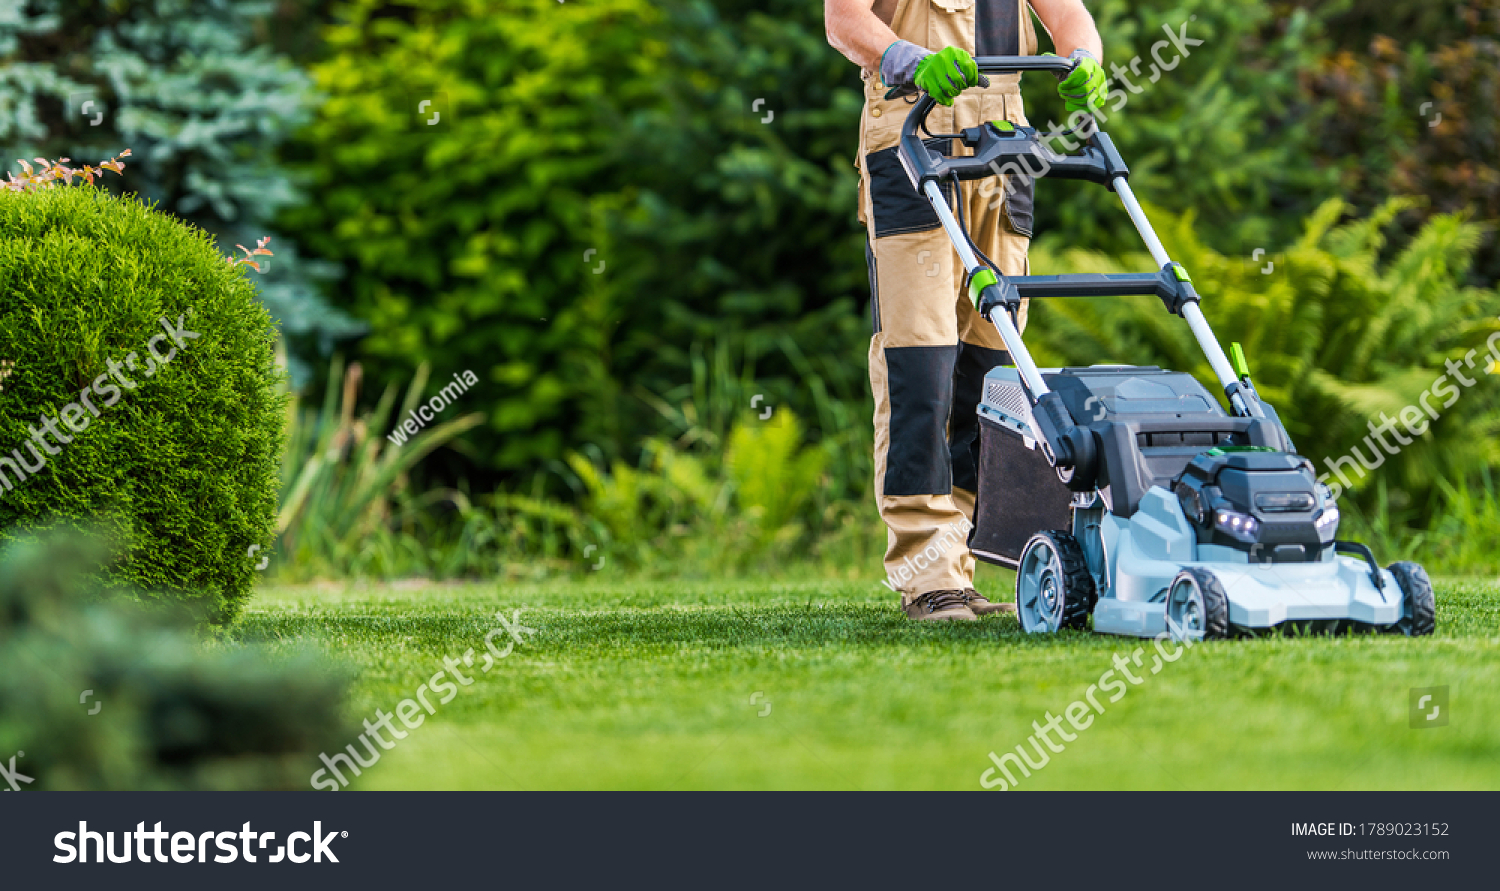 Professional Caucasian Gardener in His 40s Trimming Grass Lawn Using Modern Electric Cordless Mower. Landscaping Industry Theme. #1789023152